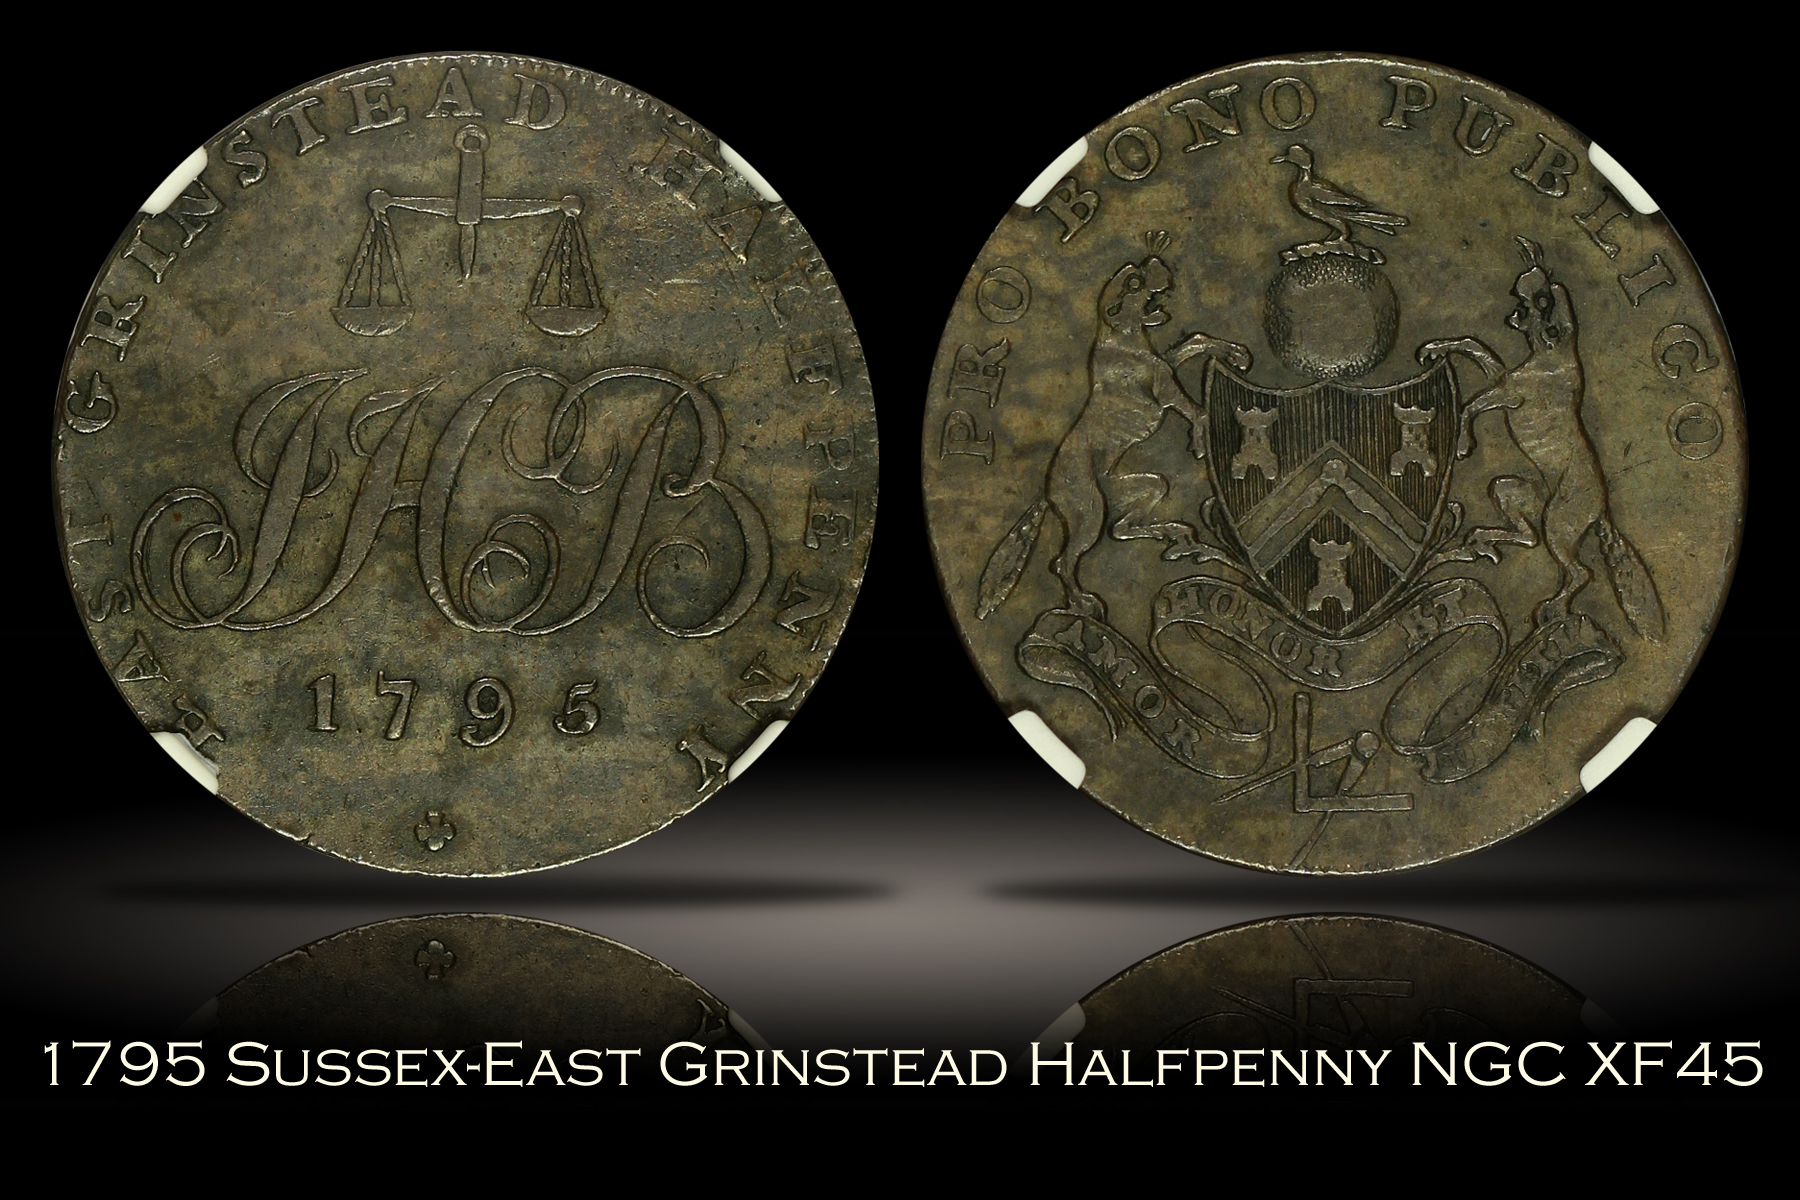 1795 Great Britain Sussex East Grinstead Halfpenny D&H-22 NGC XF45